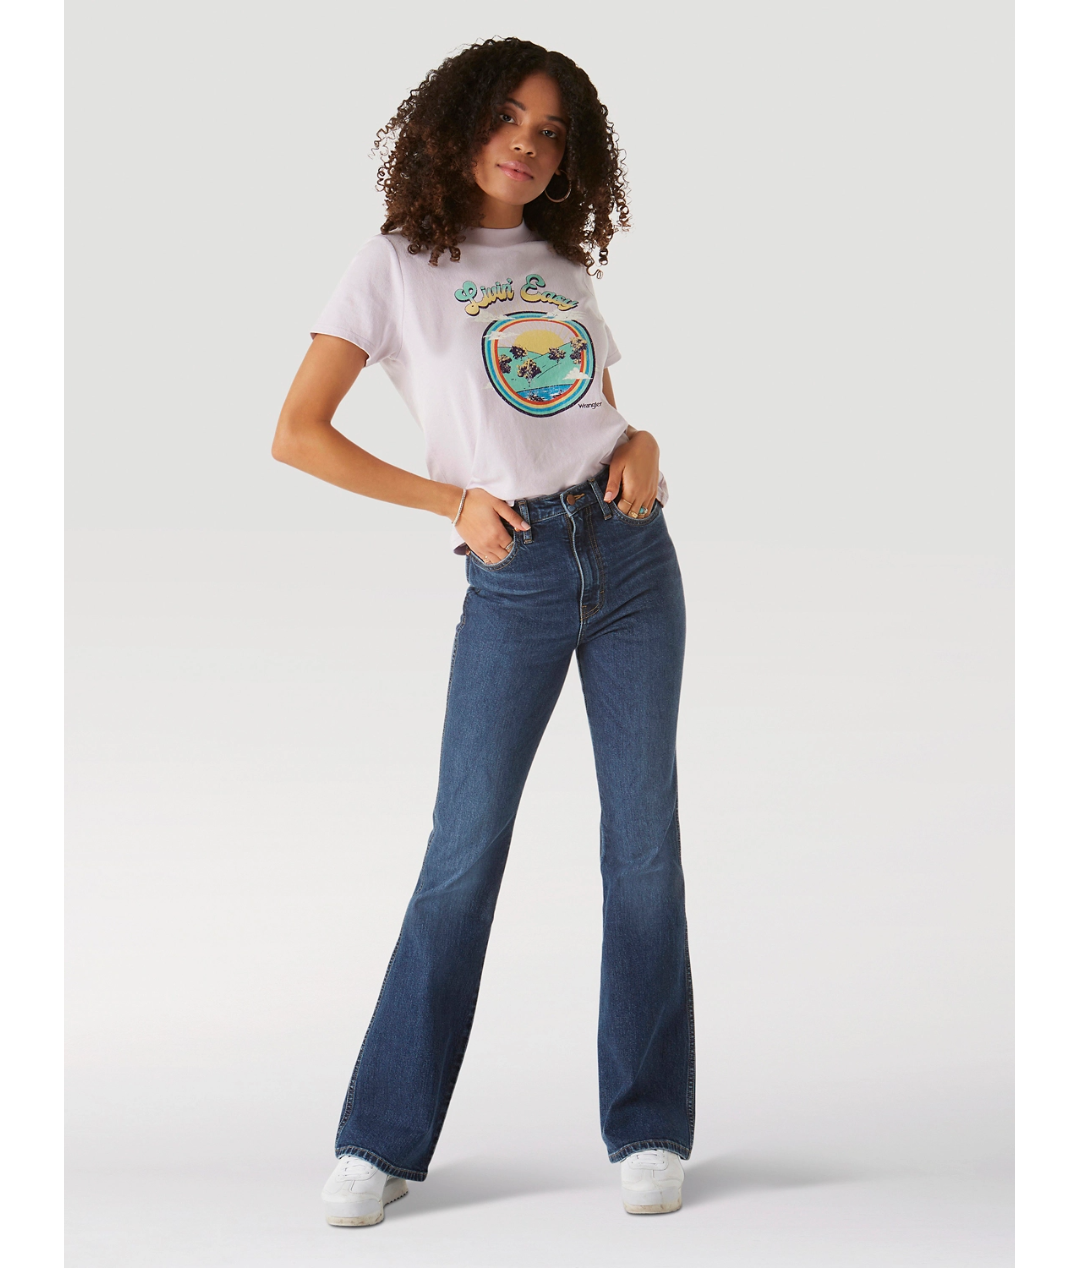 Best High-Waisted Jeans for Women 2023 | The Strategist